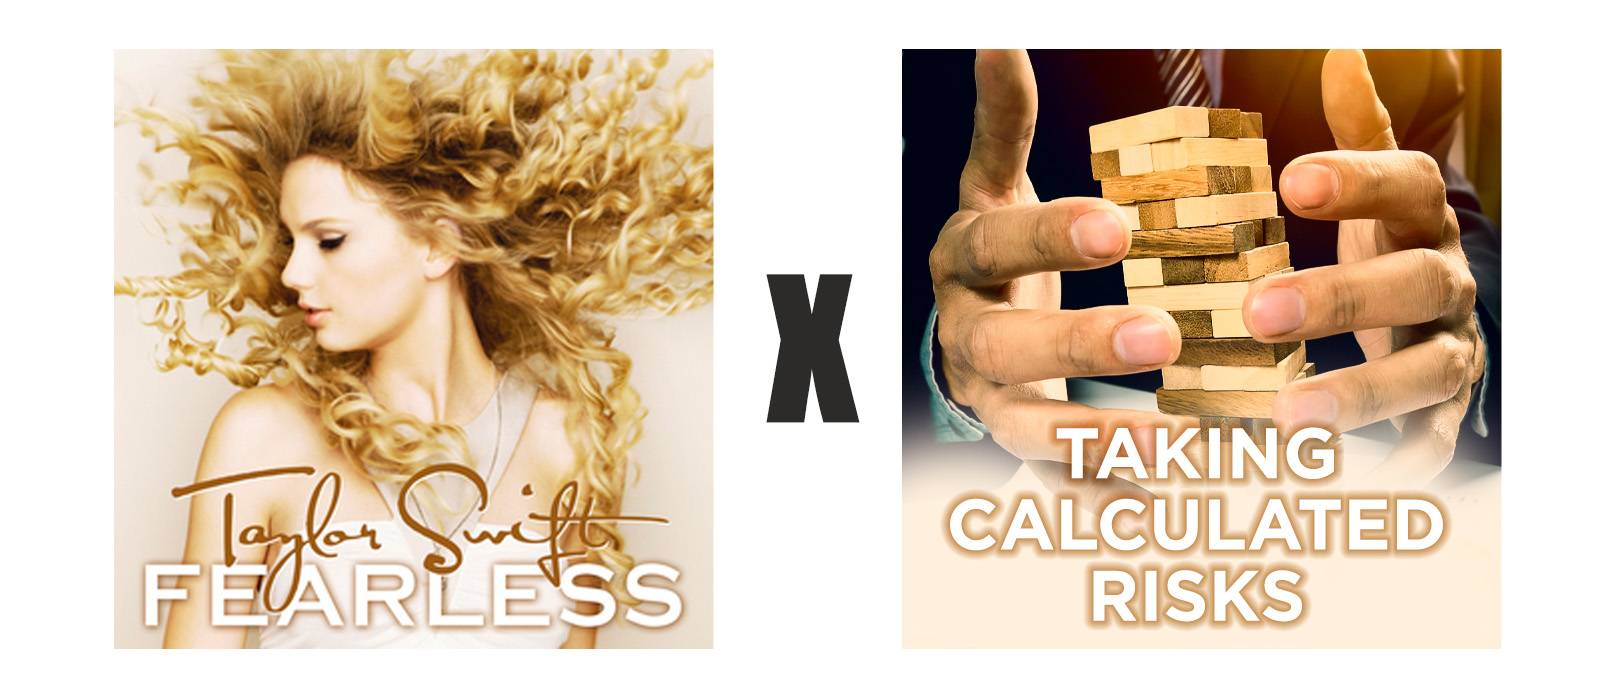 Taylor Swift Fearless x Taking Calculated Risks_